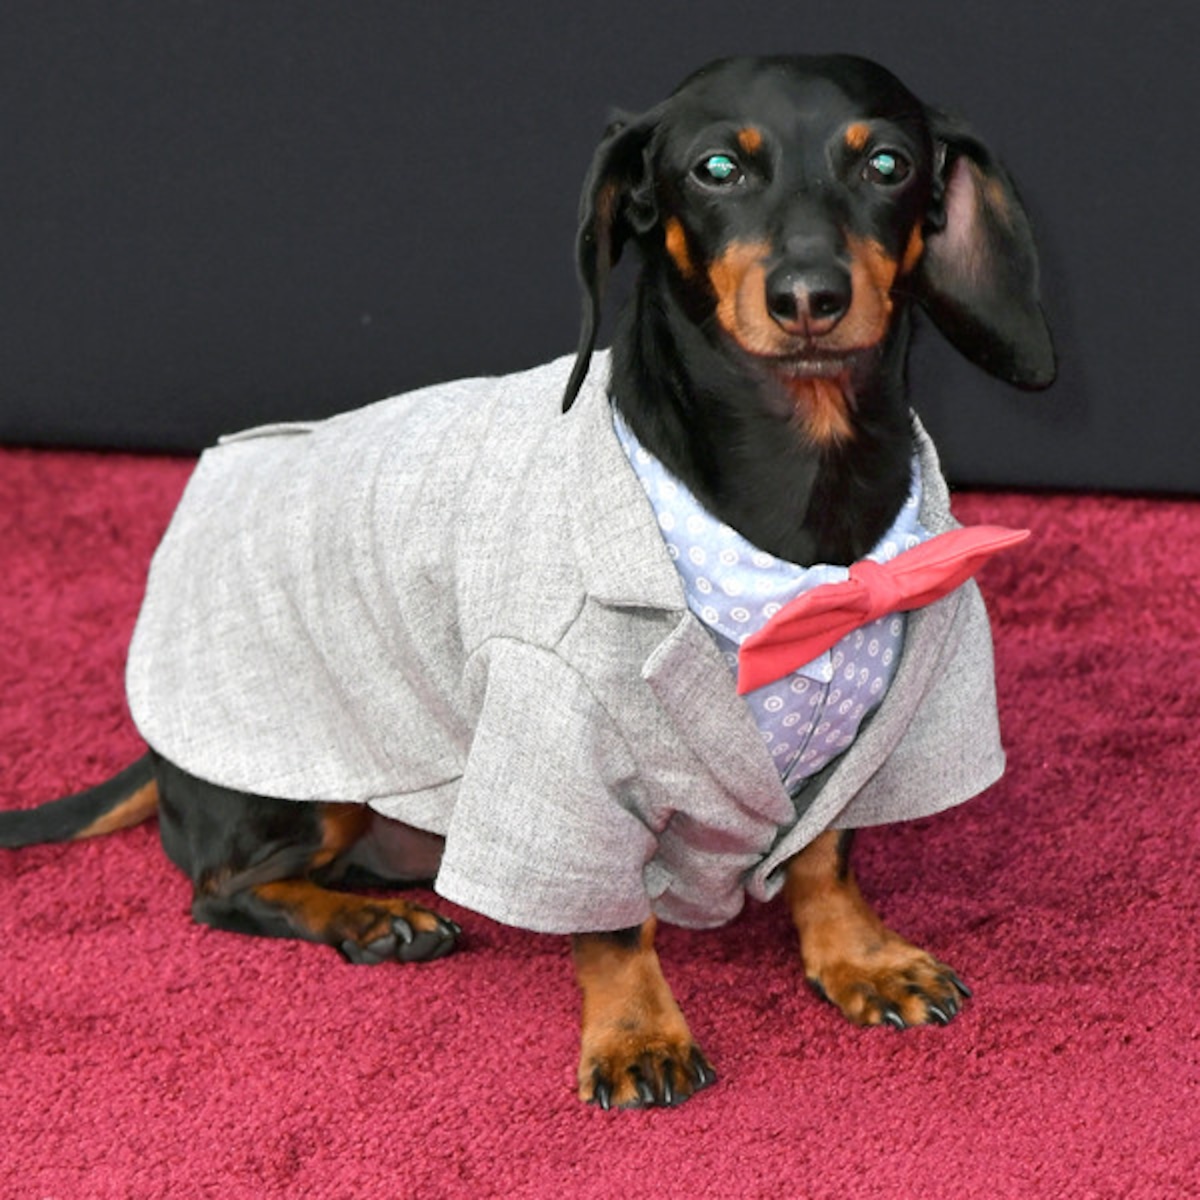 So Sweet! Crusoe the Celebrity DachshuId Is Your PCAs Animal Star - E!  Online